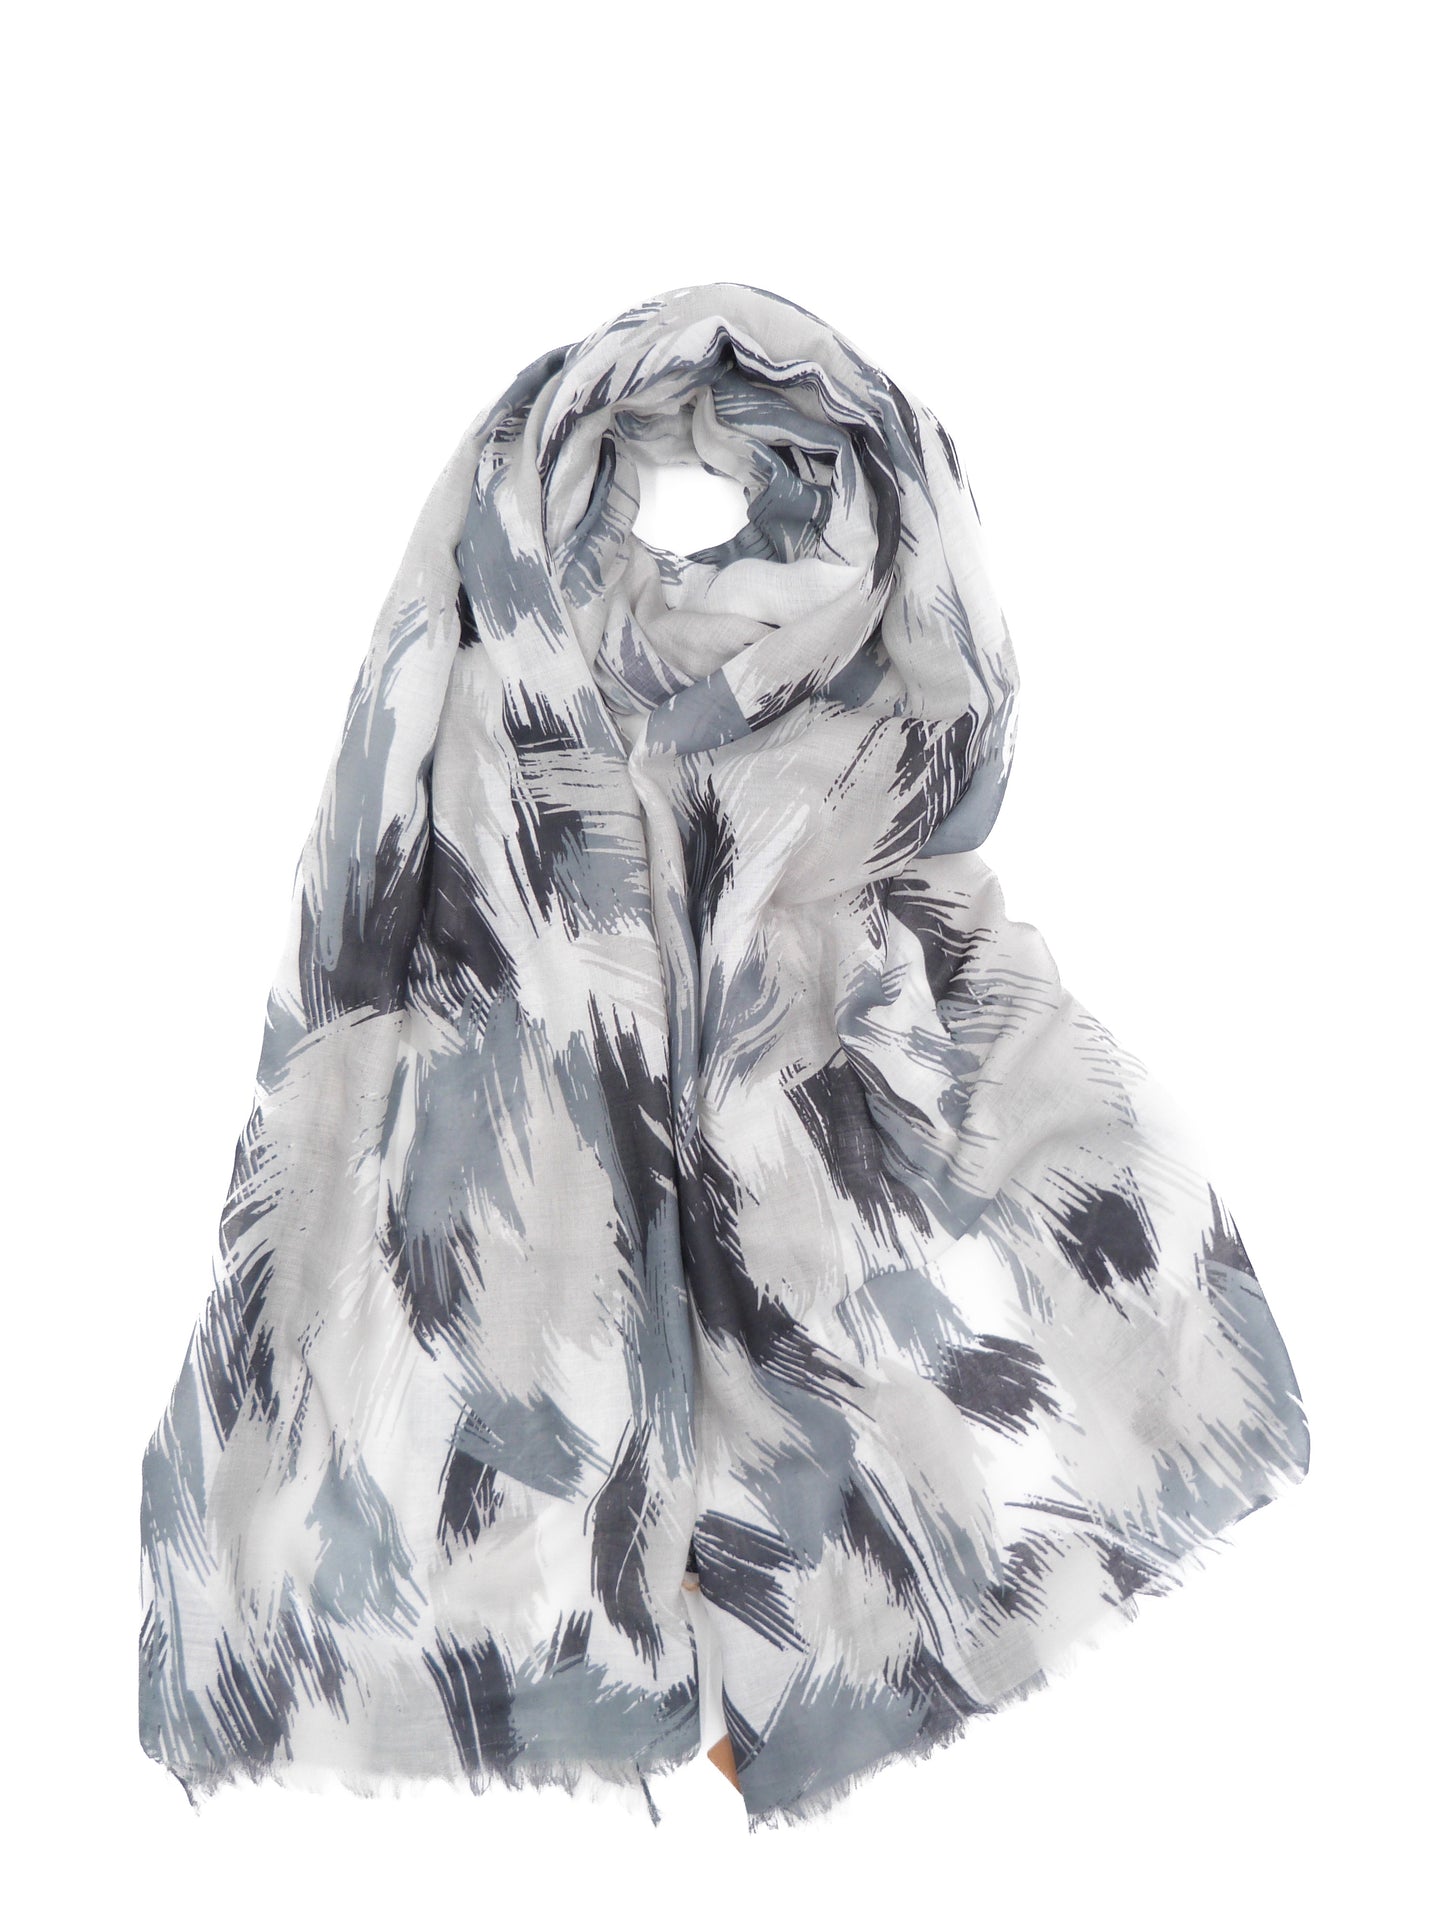 Art Brush  Print Scarf Come With Gift Box